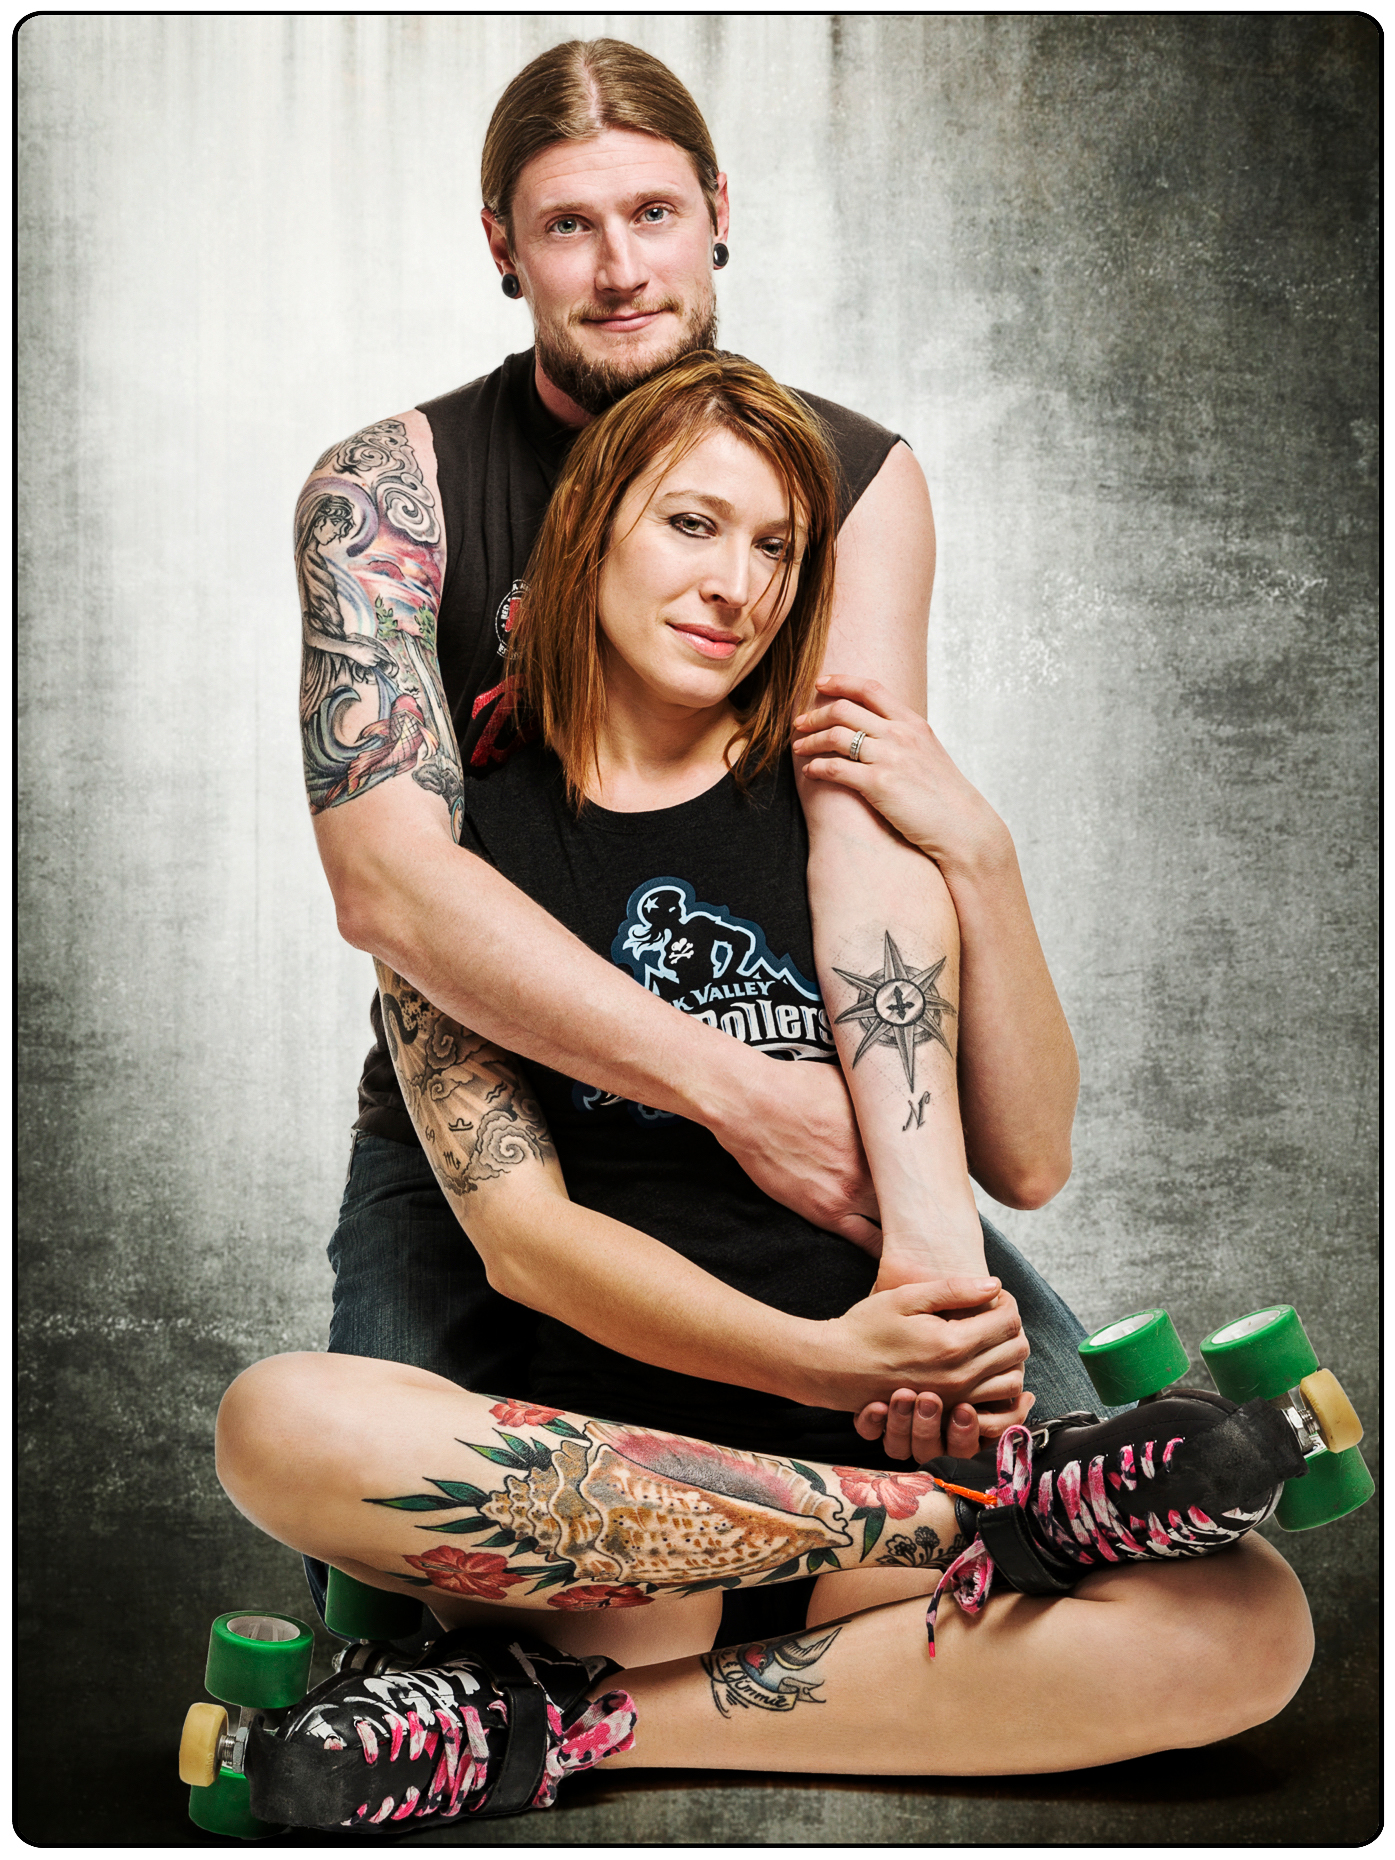 Studio portrait of man and woman with tattoos